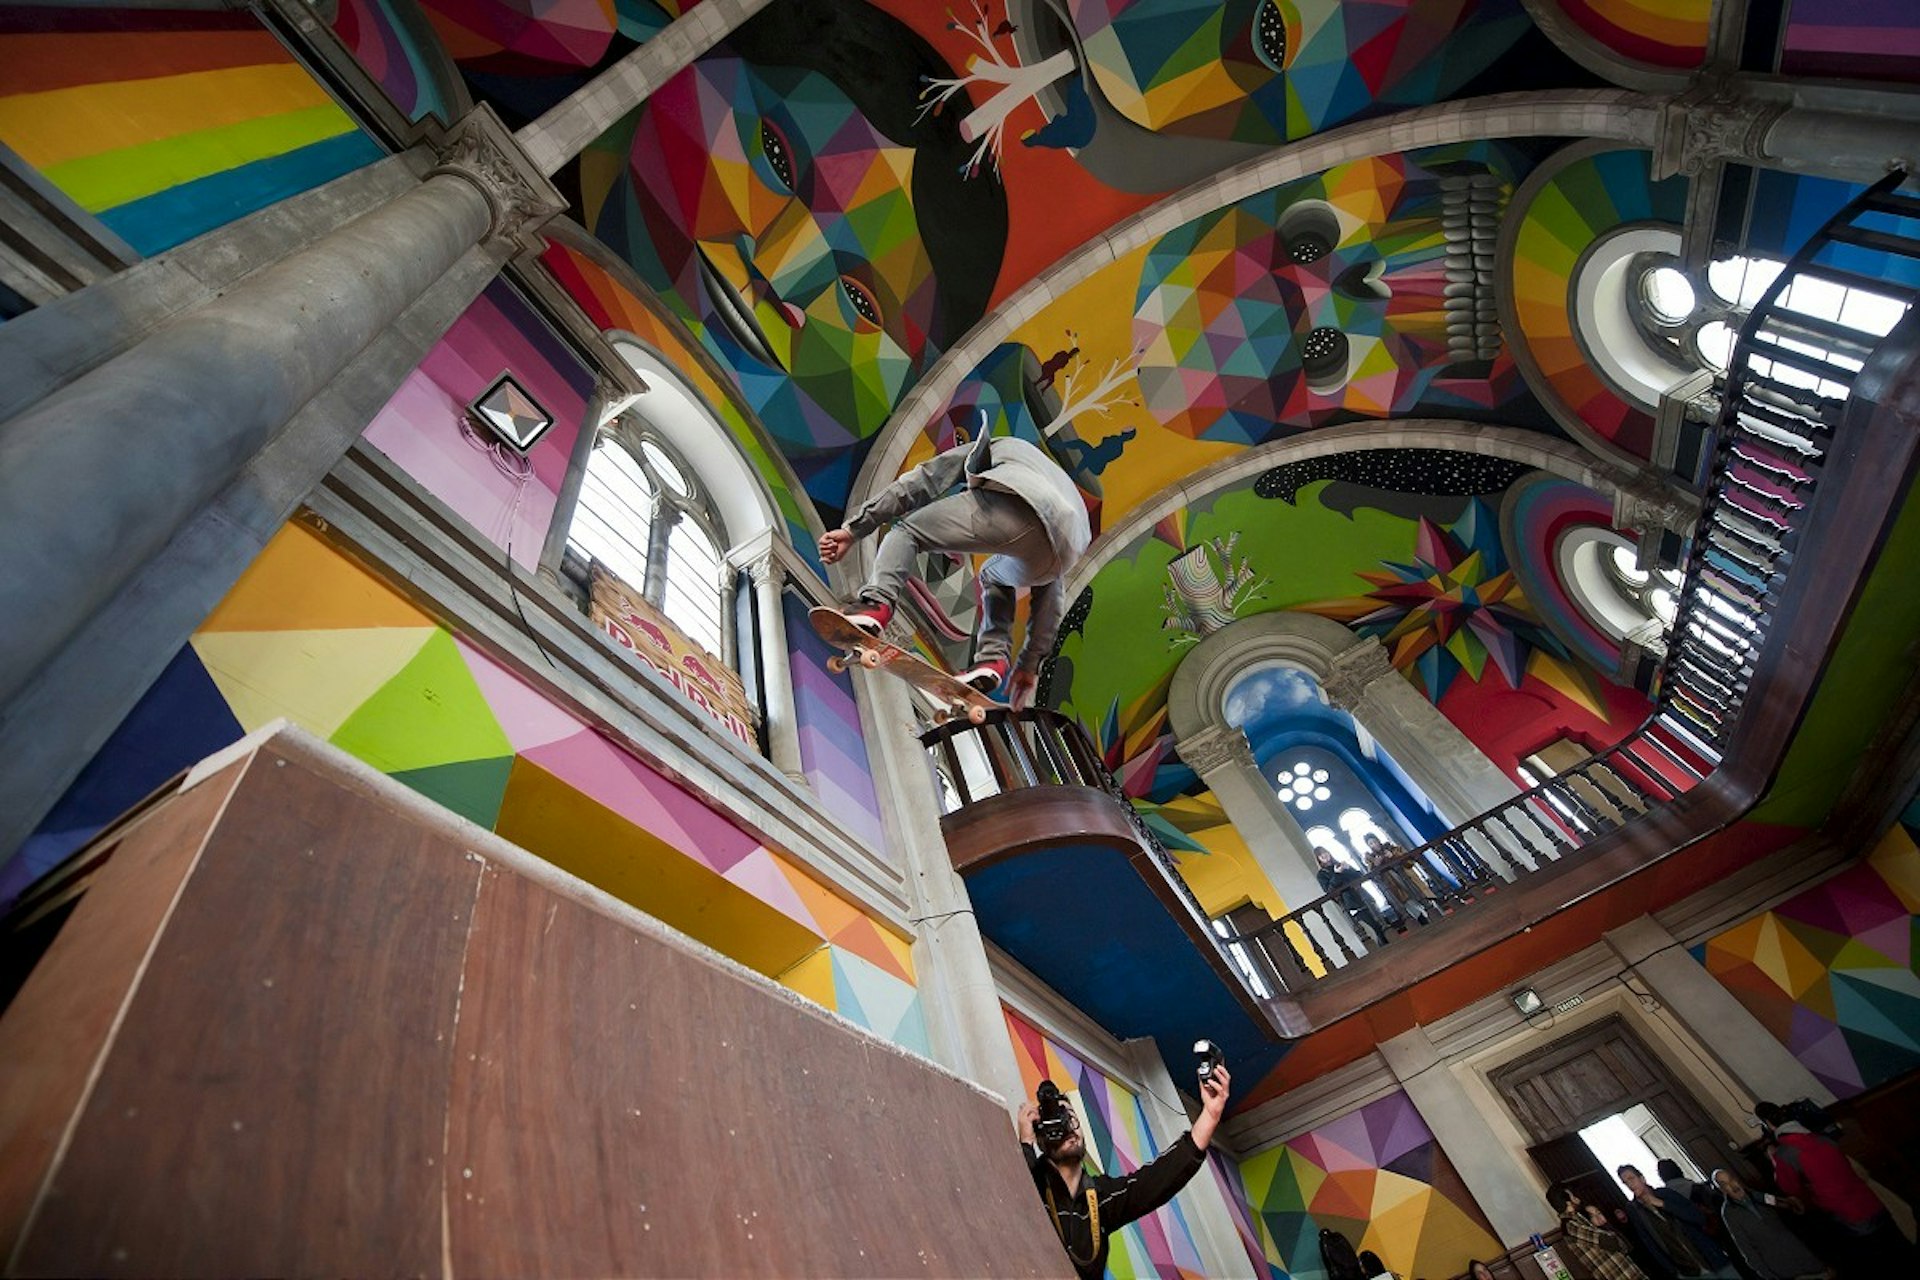 Video: Artist who transformed 100-year-old church into a rainbow skatepark